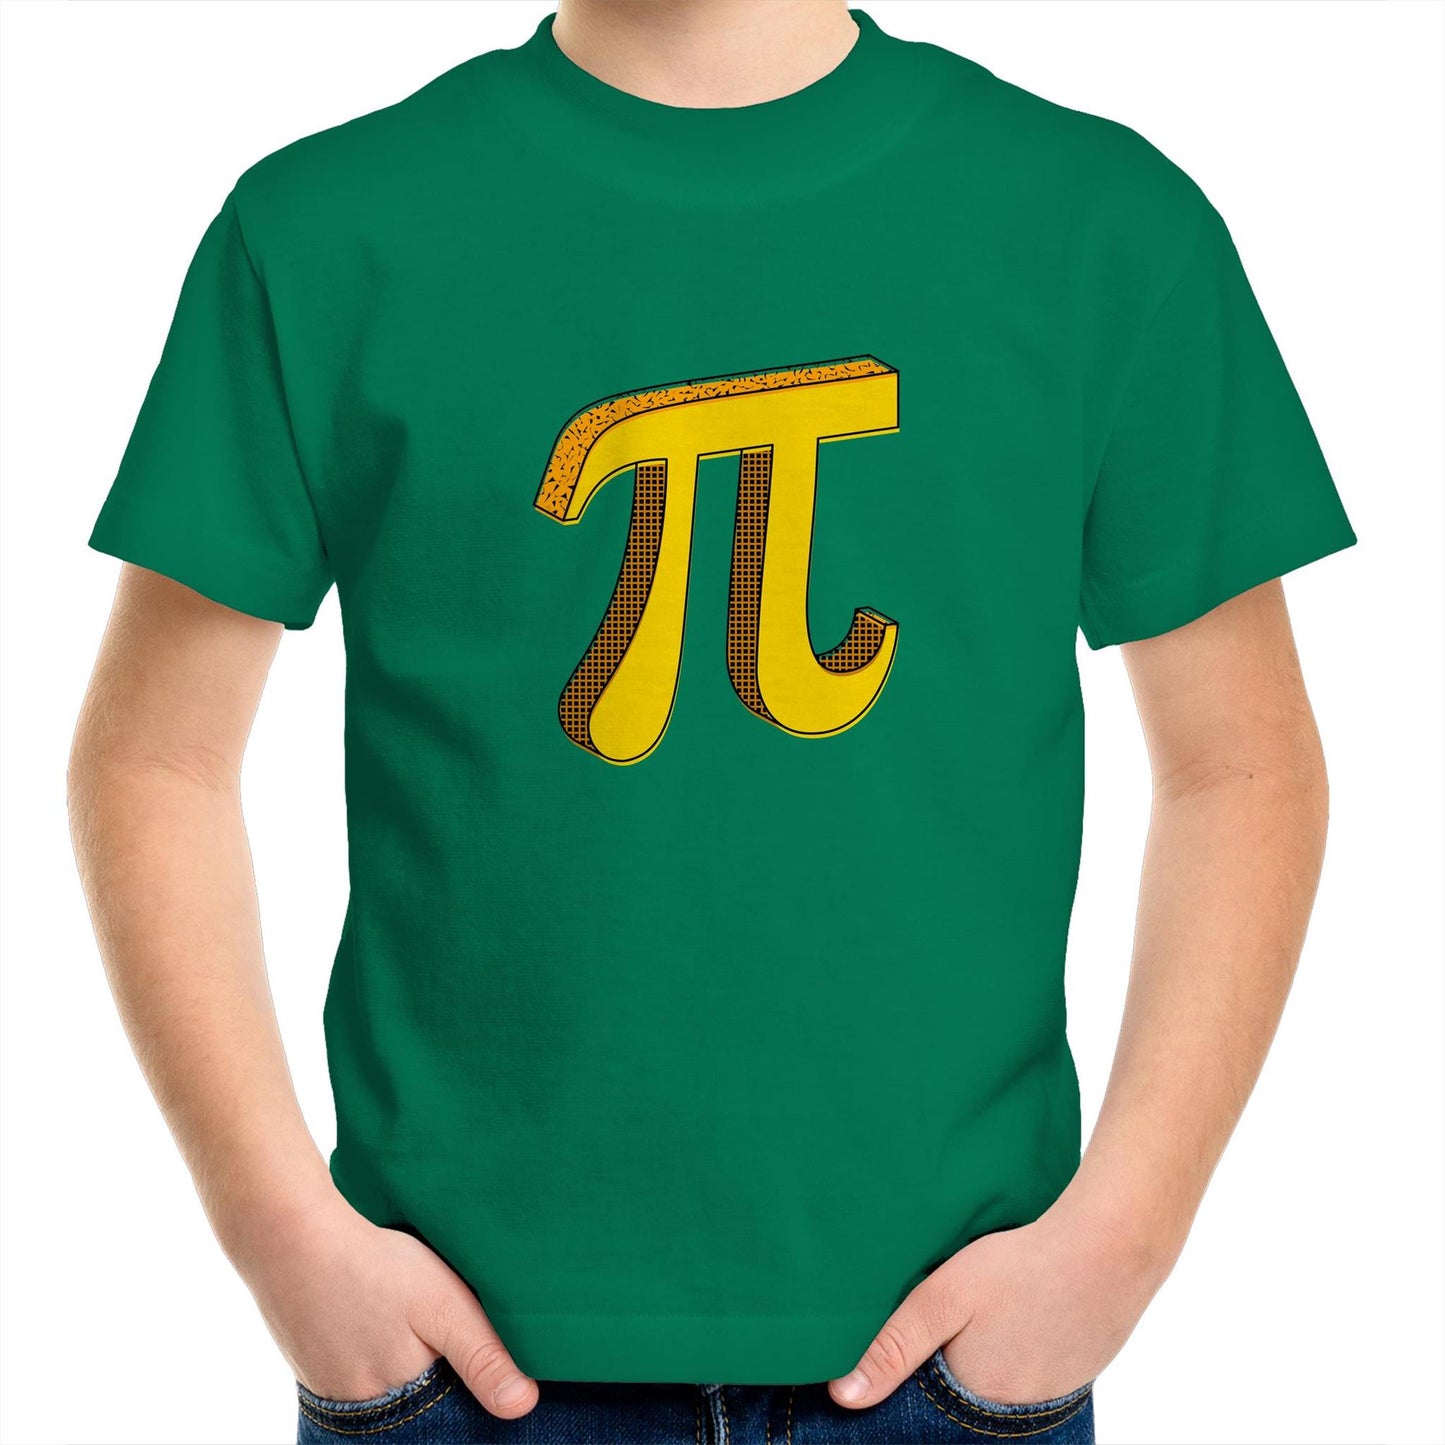 Pi - Kids Youth Crew T-Shirt Kelly Green Kids Youth T-shirt Maths Science